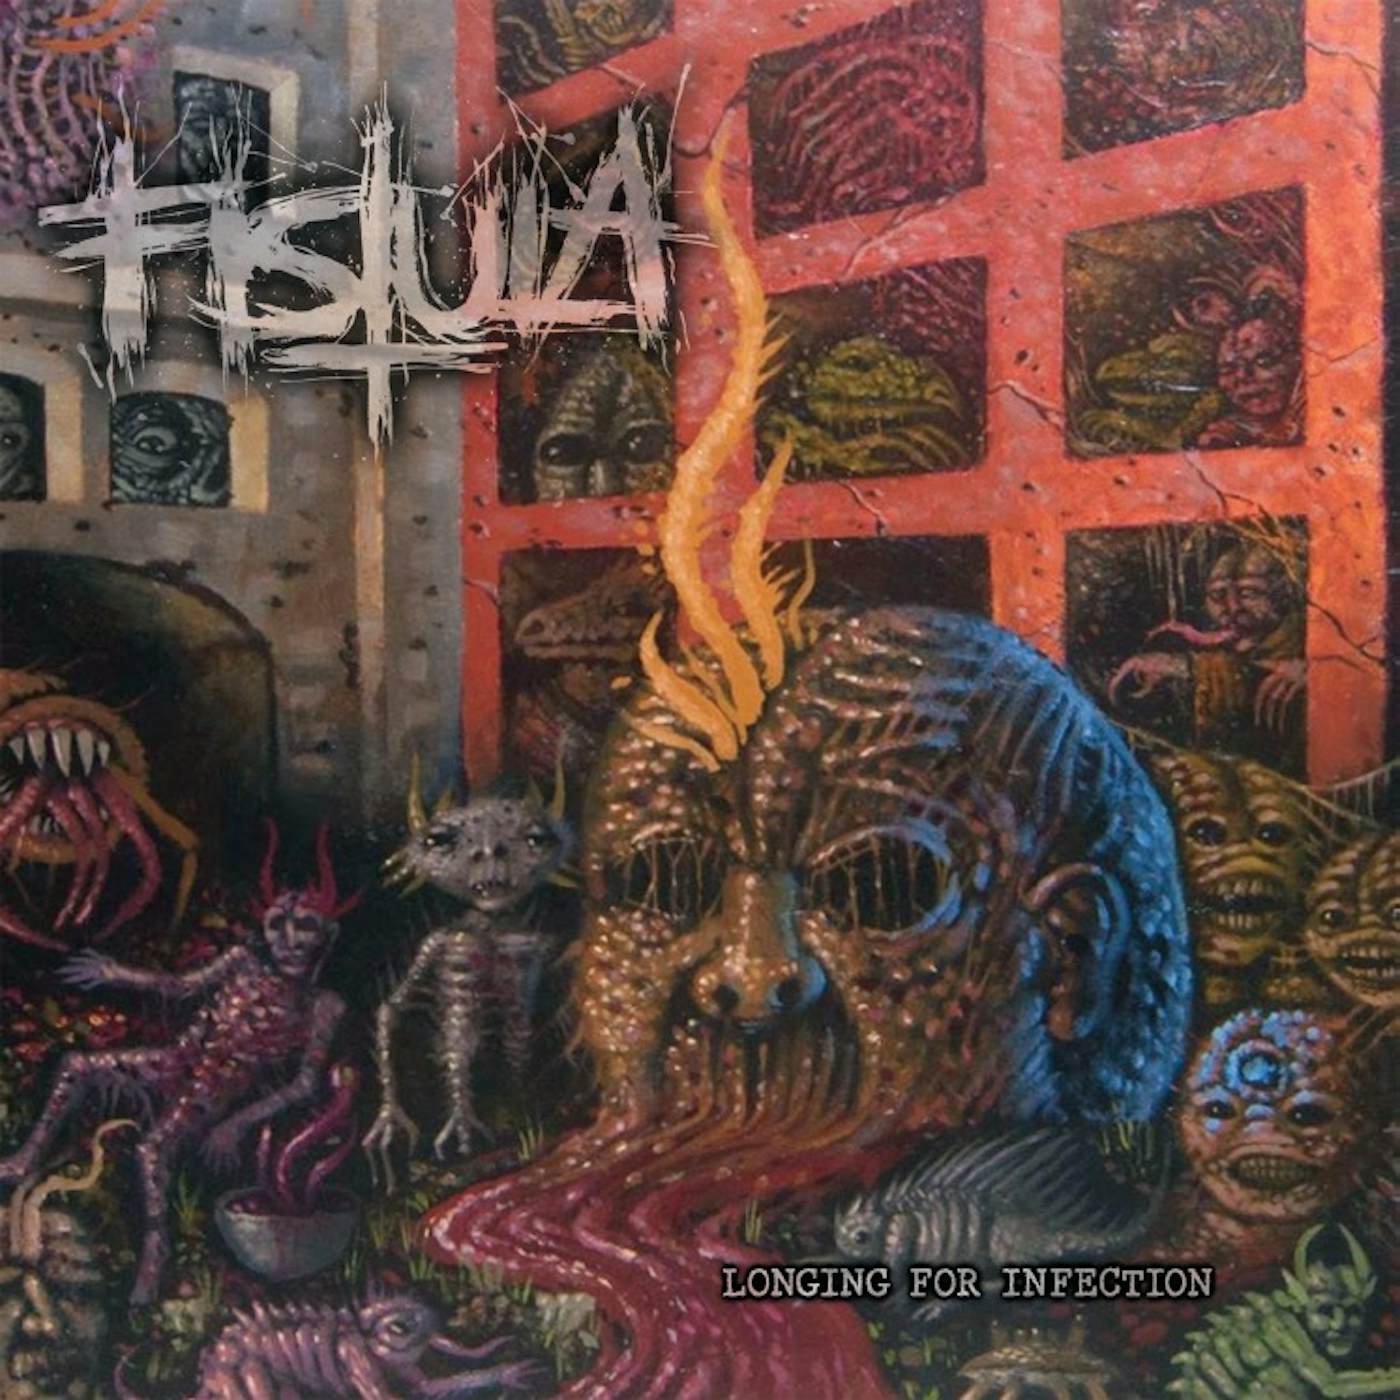 Fistula LONGING FOR INFECTION CD